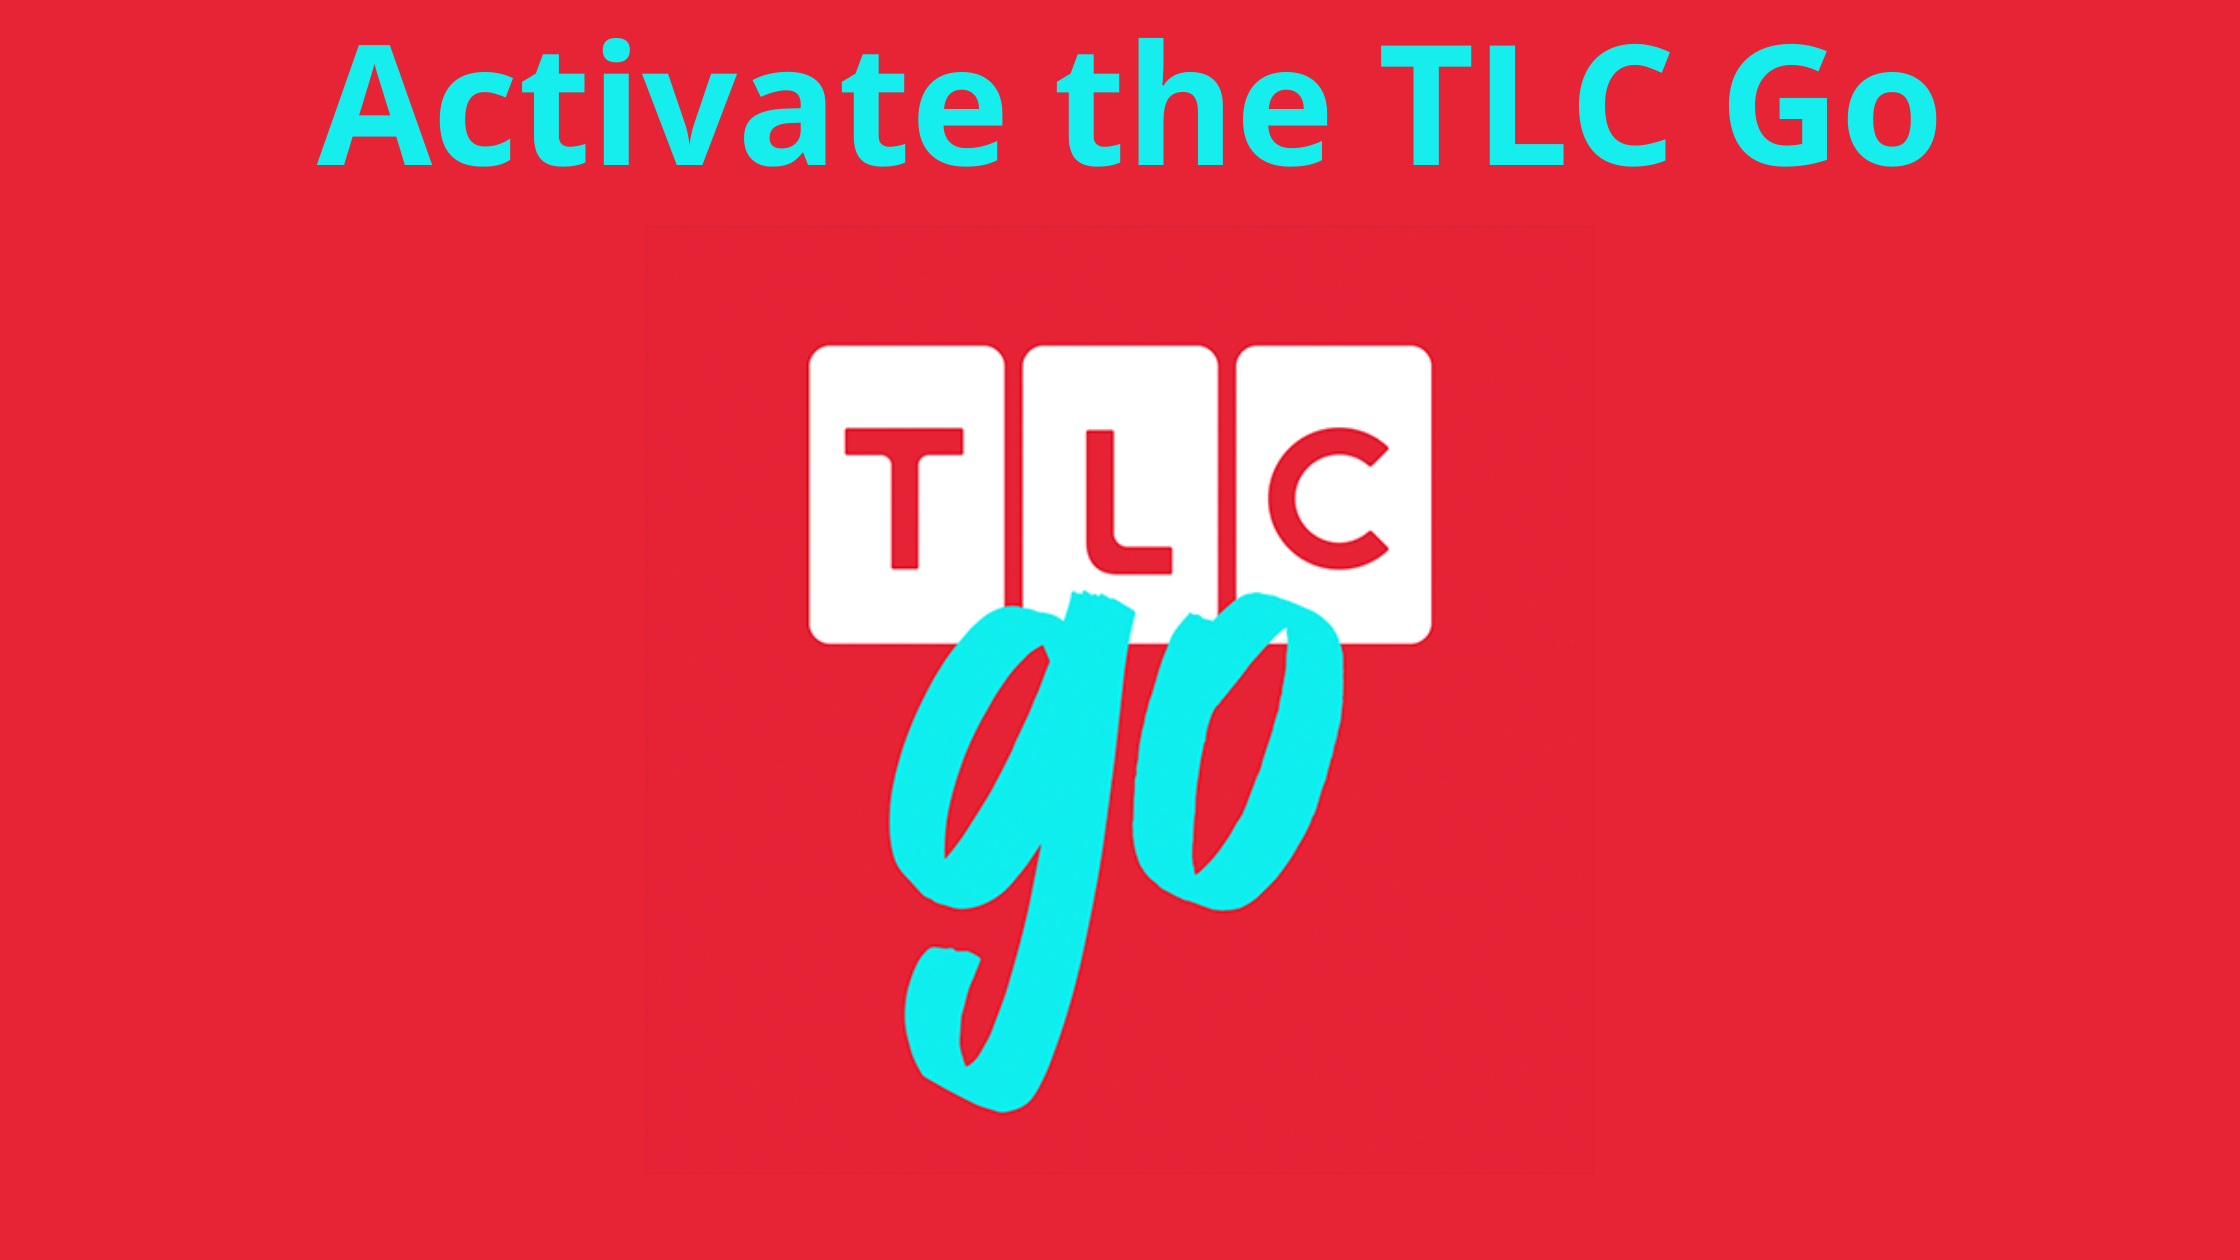 Activate the TLC Go